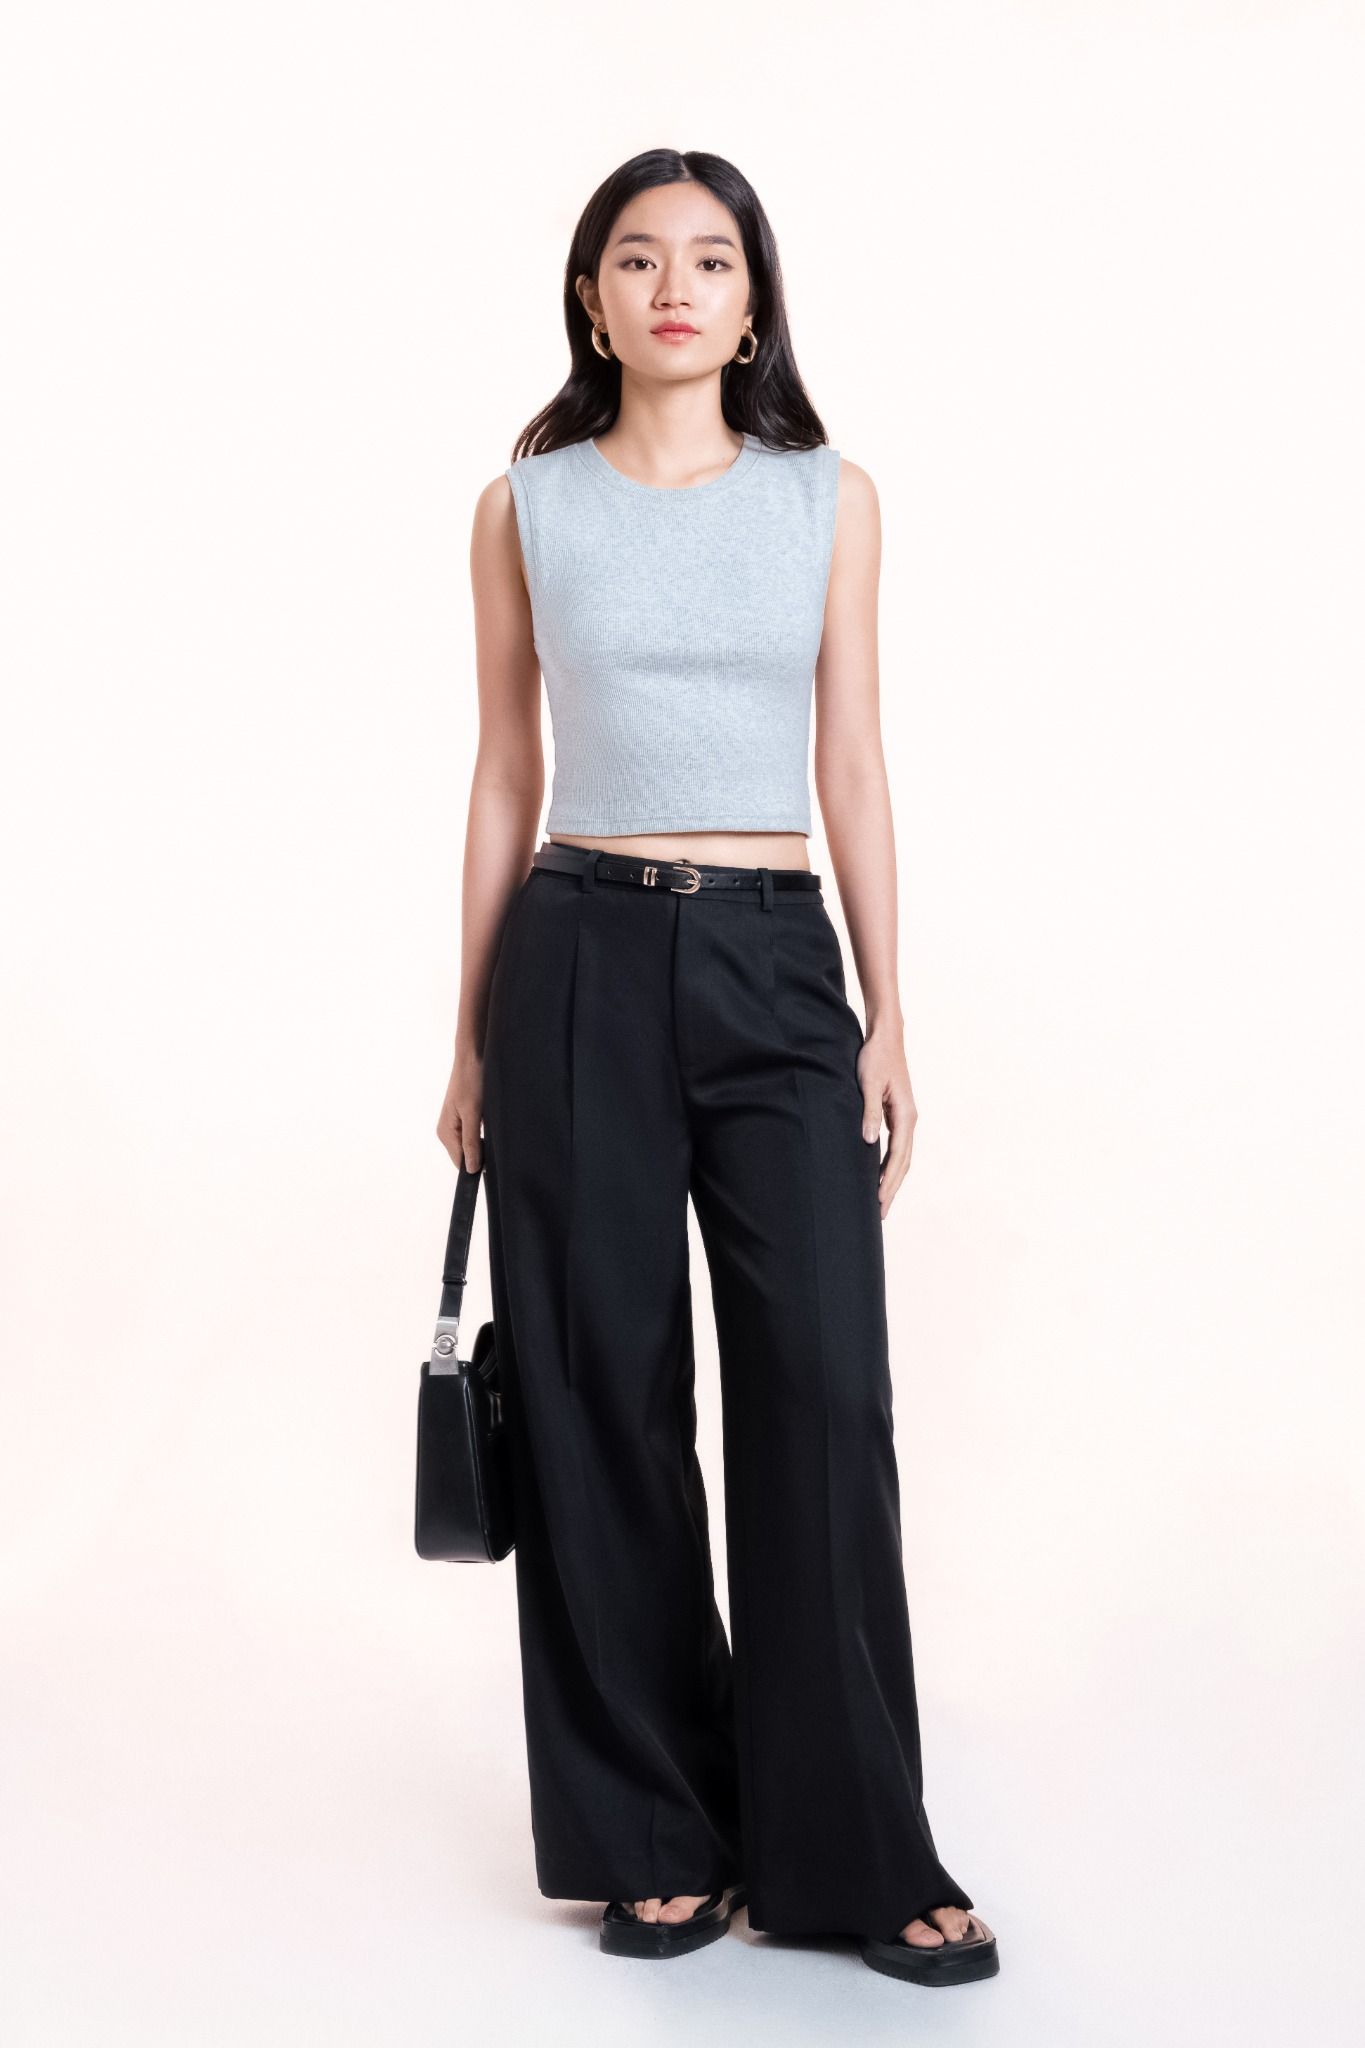  Black Tailored Wide Leg Trousers 